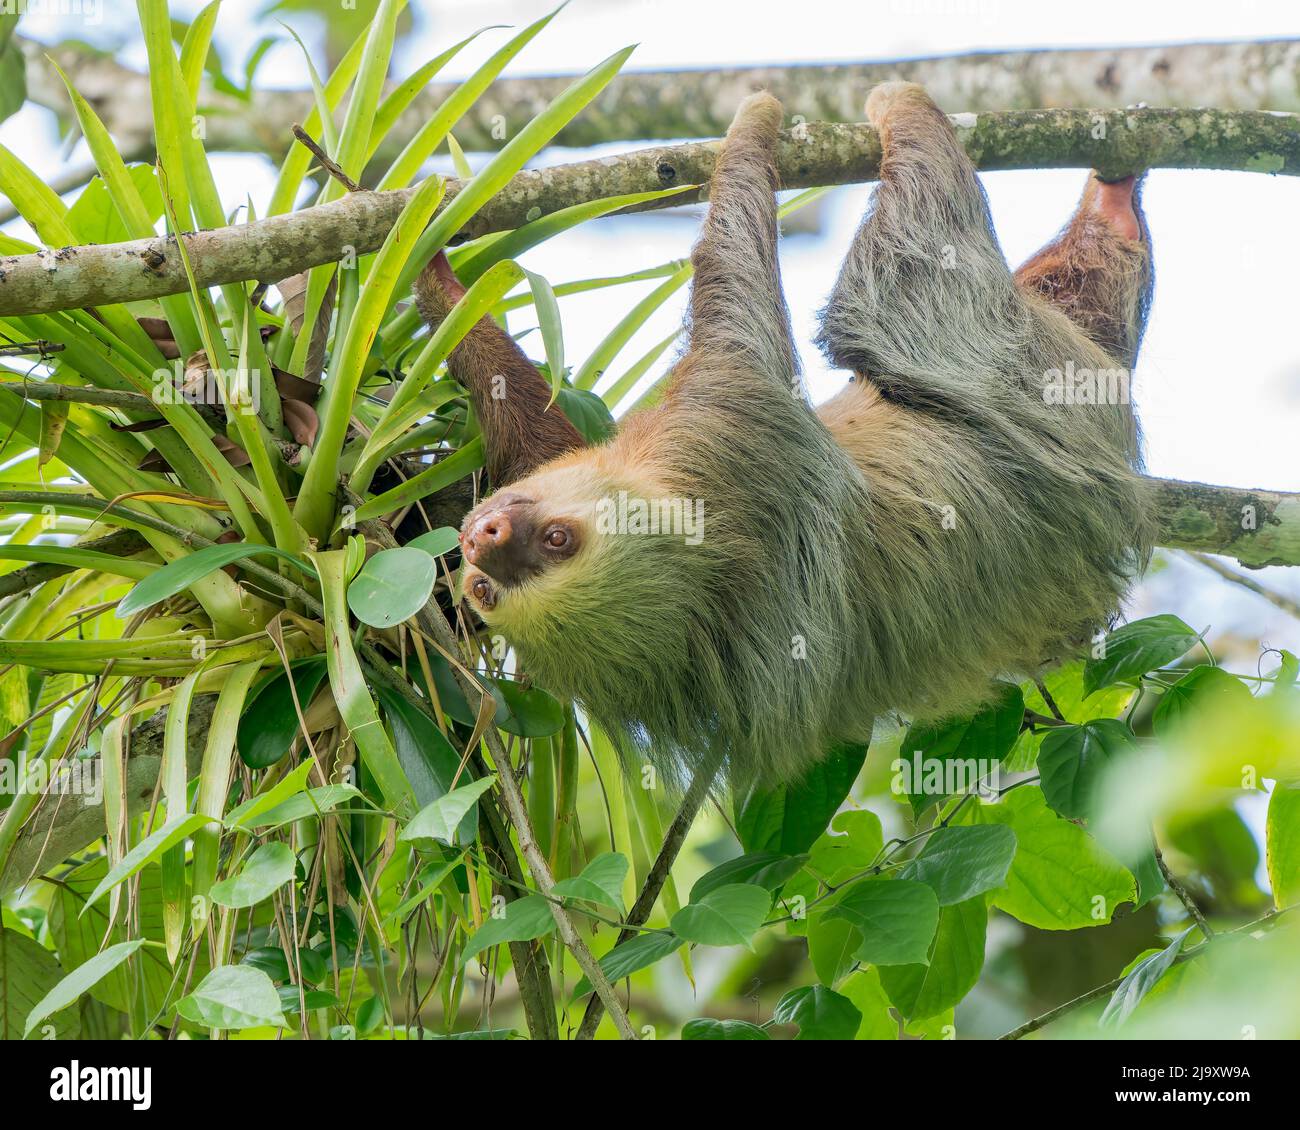 Sloth hanging on a tree next to a bromeliad in Costa Rica Stock Photo